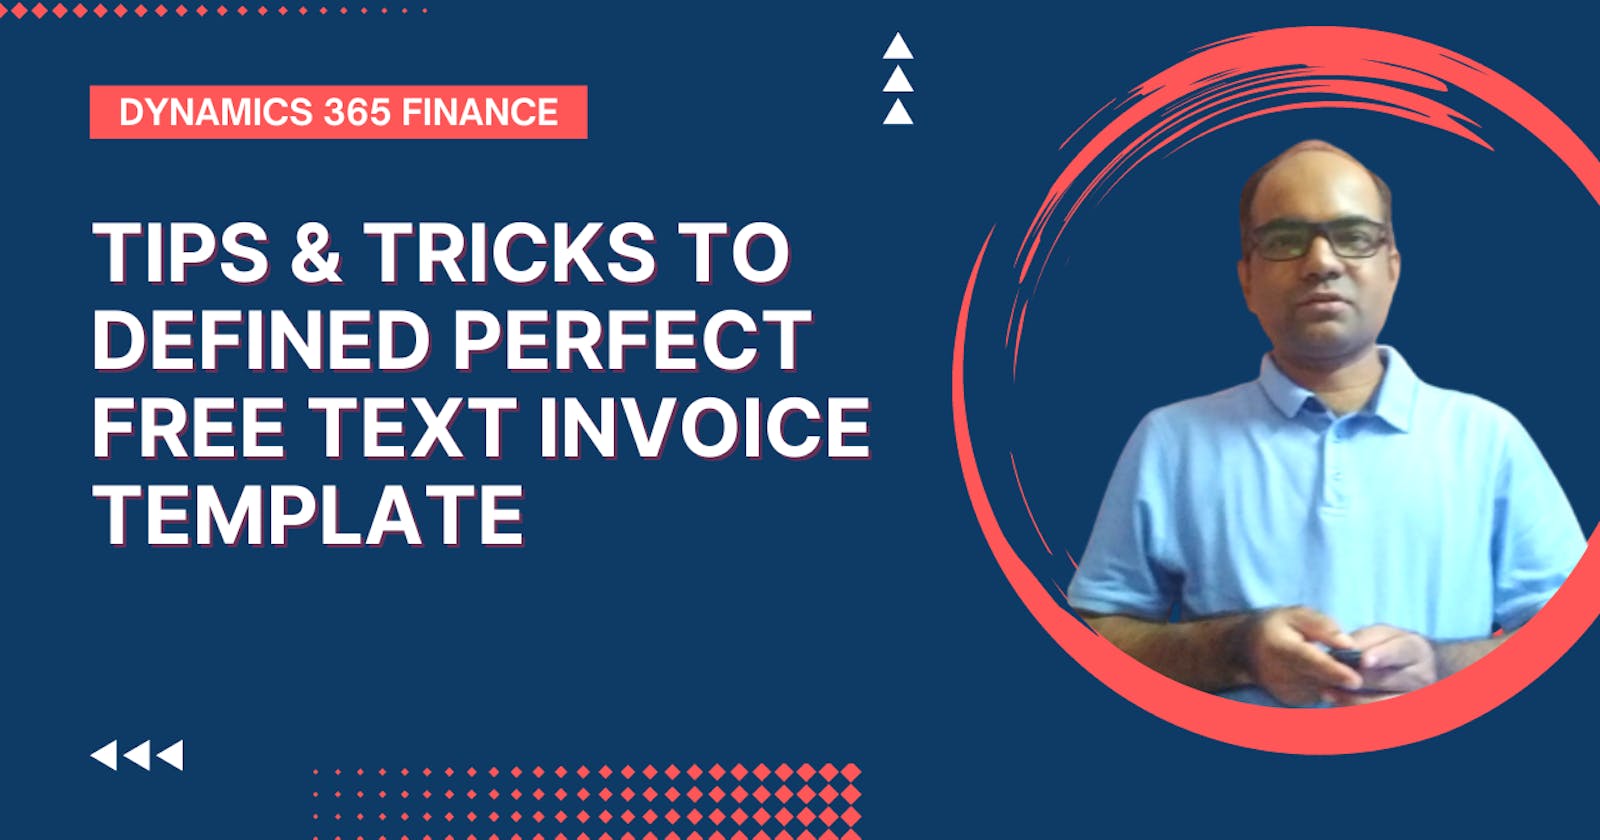 Tips for leveraging free text invoice templates